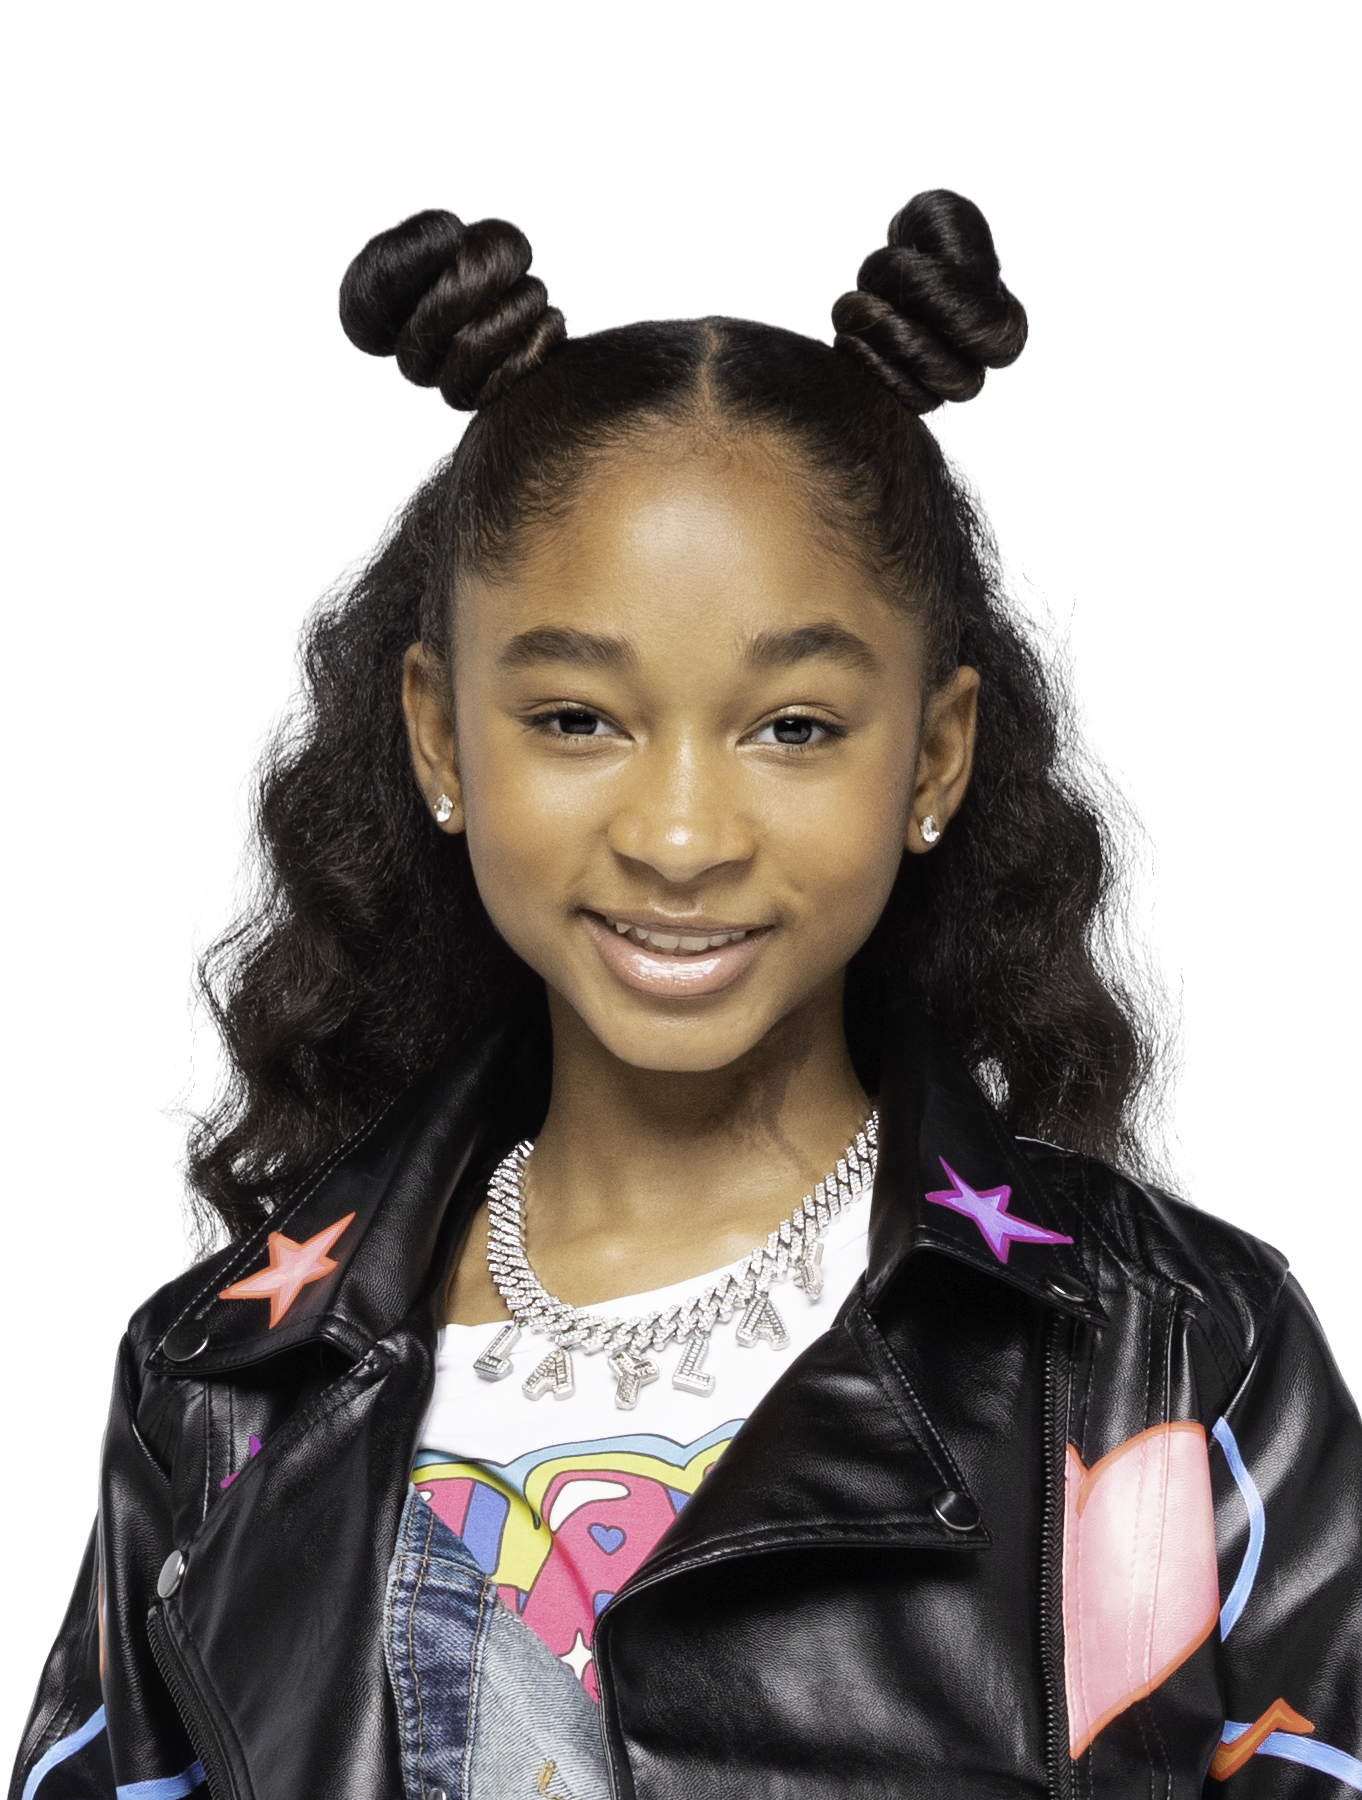 NickALive!: Nickelodeon Greenlights All New Comedy Series Starring Alaya “That Girl Lay Lay” High